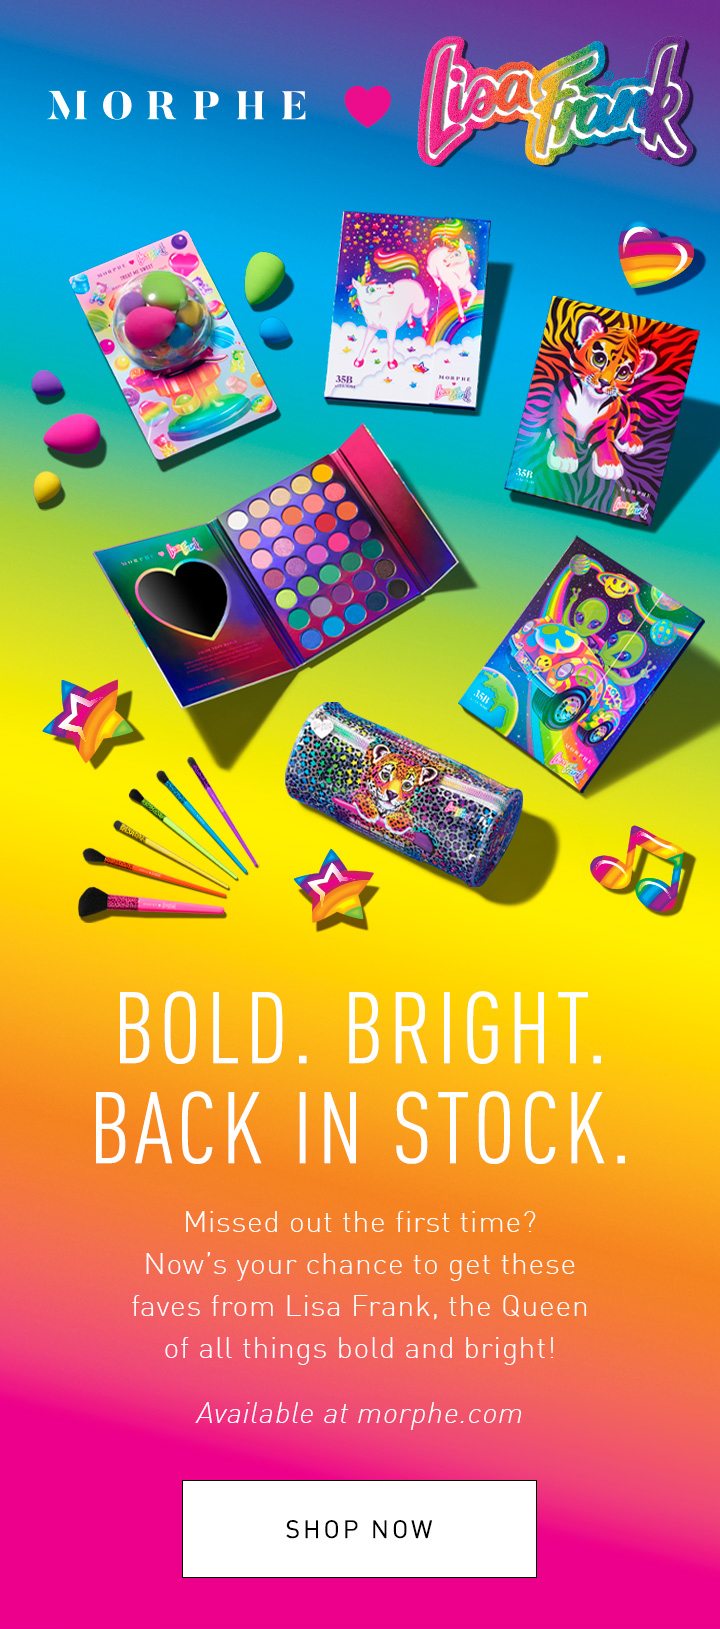 MORPHE ❤ LISA FRANK BOLD. BRIGHT. BACK IN STOCK. Missed out the first time? Now’s your chance to get these faves from Lisa Frank, the Queen of all things bold and bright! Available at morphe.com + Morphe stores SHOP NOW 